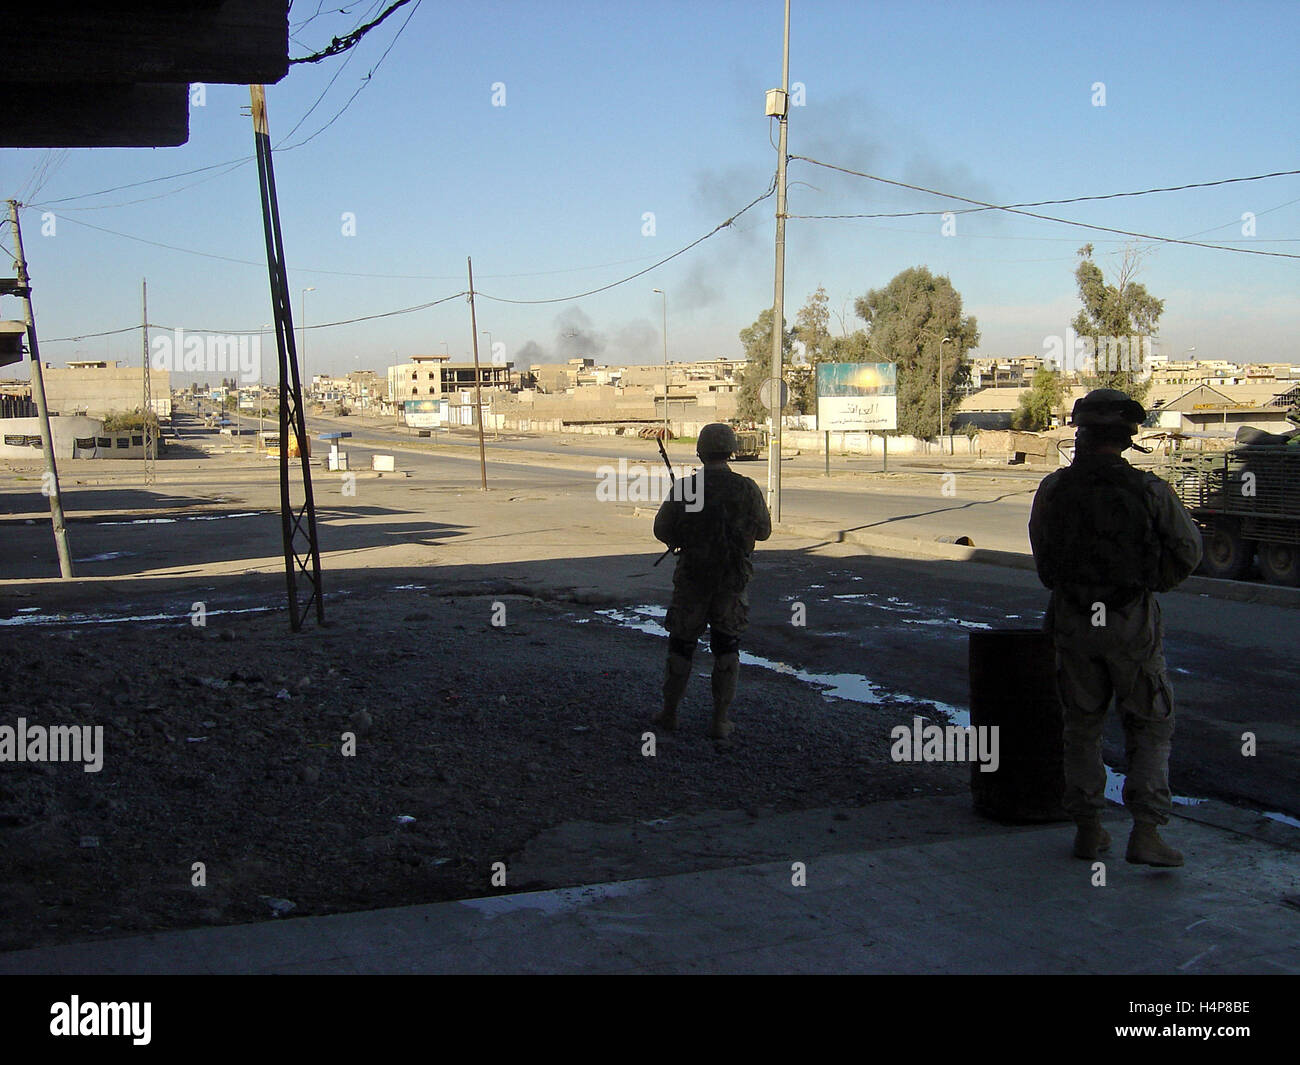 3rd December 2004 U.S. Army soldiers on the streets of Mosul, Iraq, watch “Stryker” ICVs racing to join battle with insurgents ahead. Stock Photo